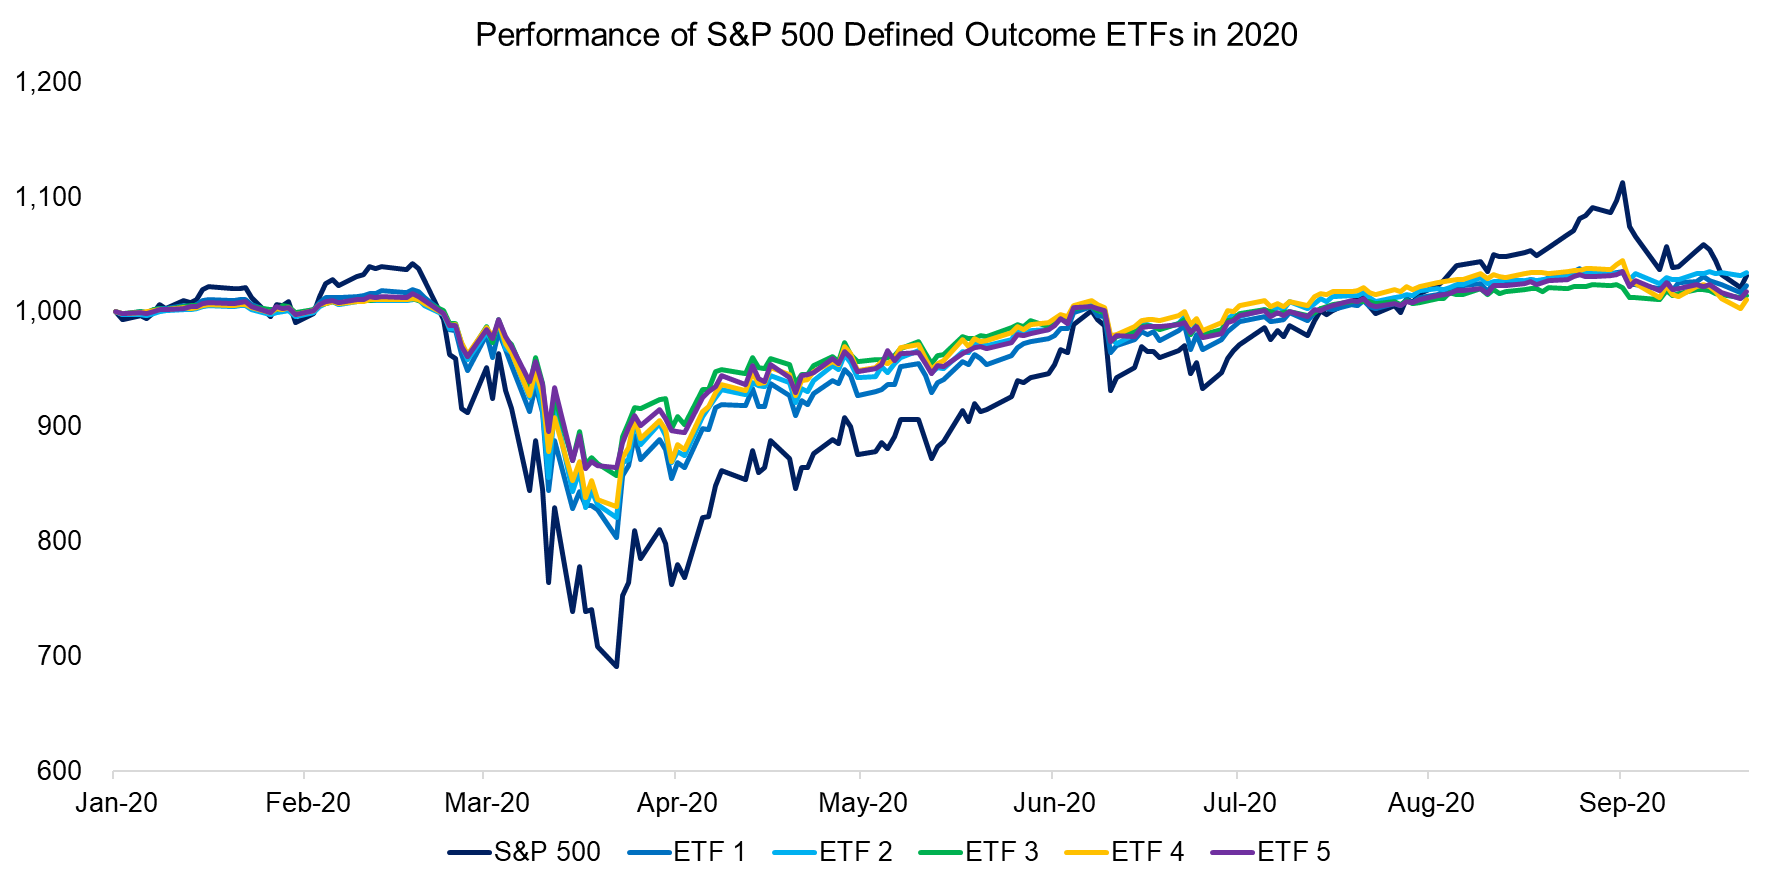 Performance of S&P 500 Defined Outcome ETFs in 2020